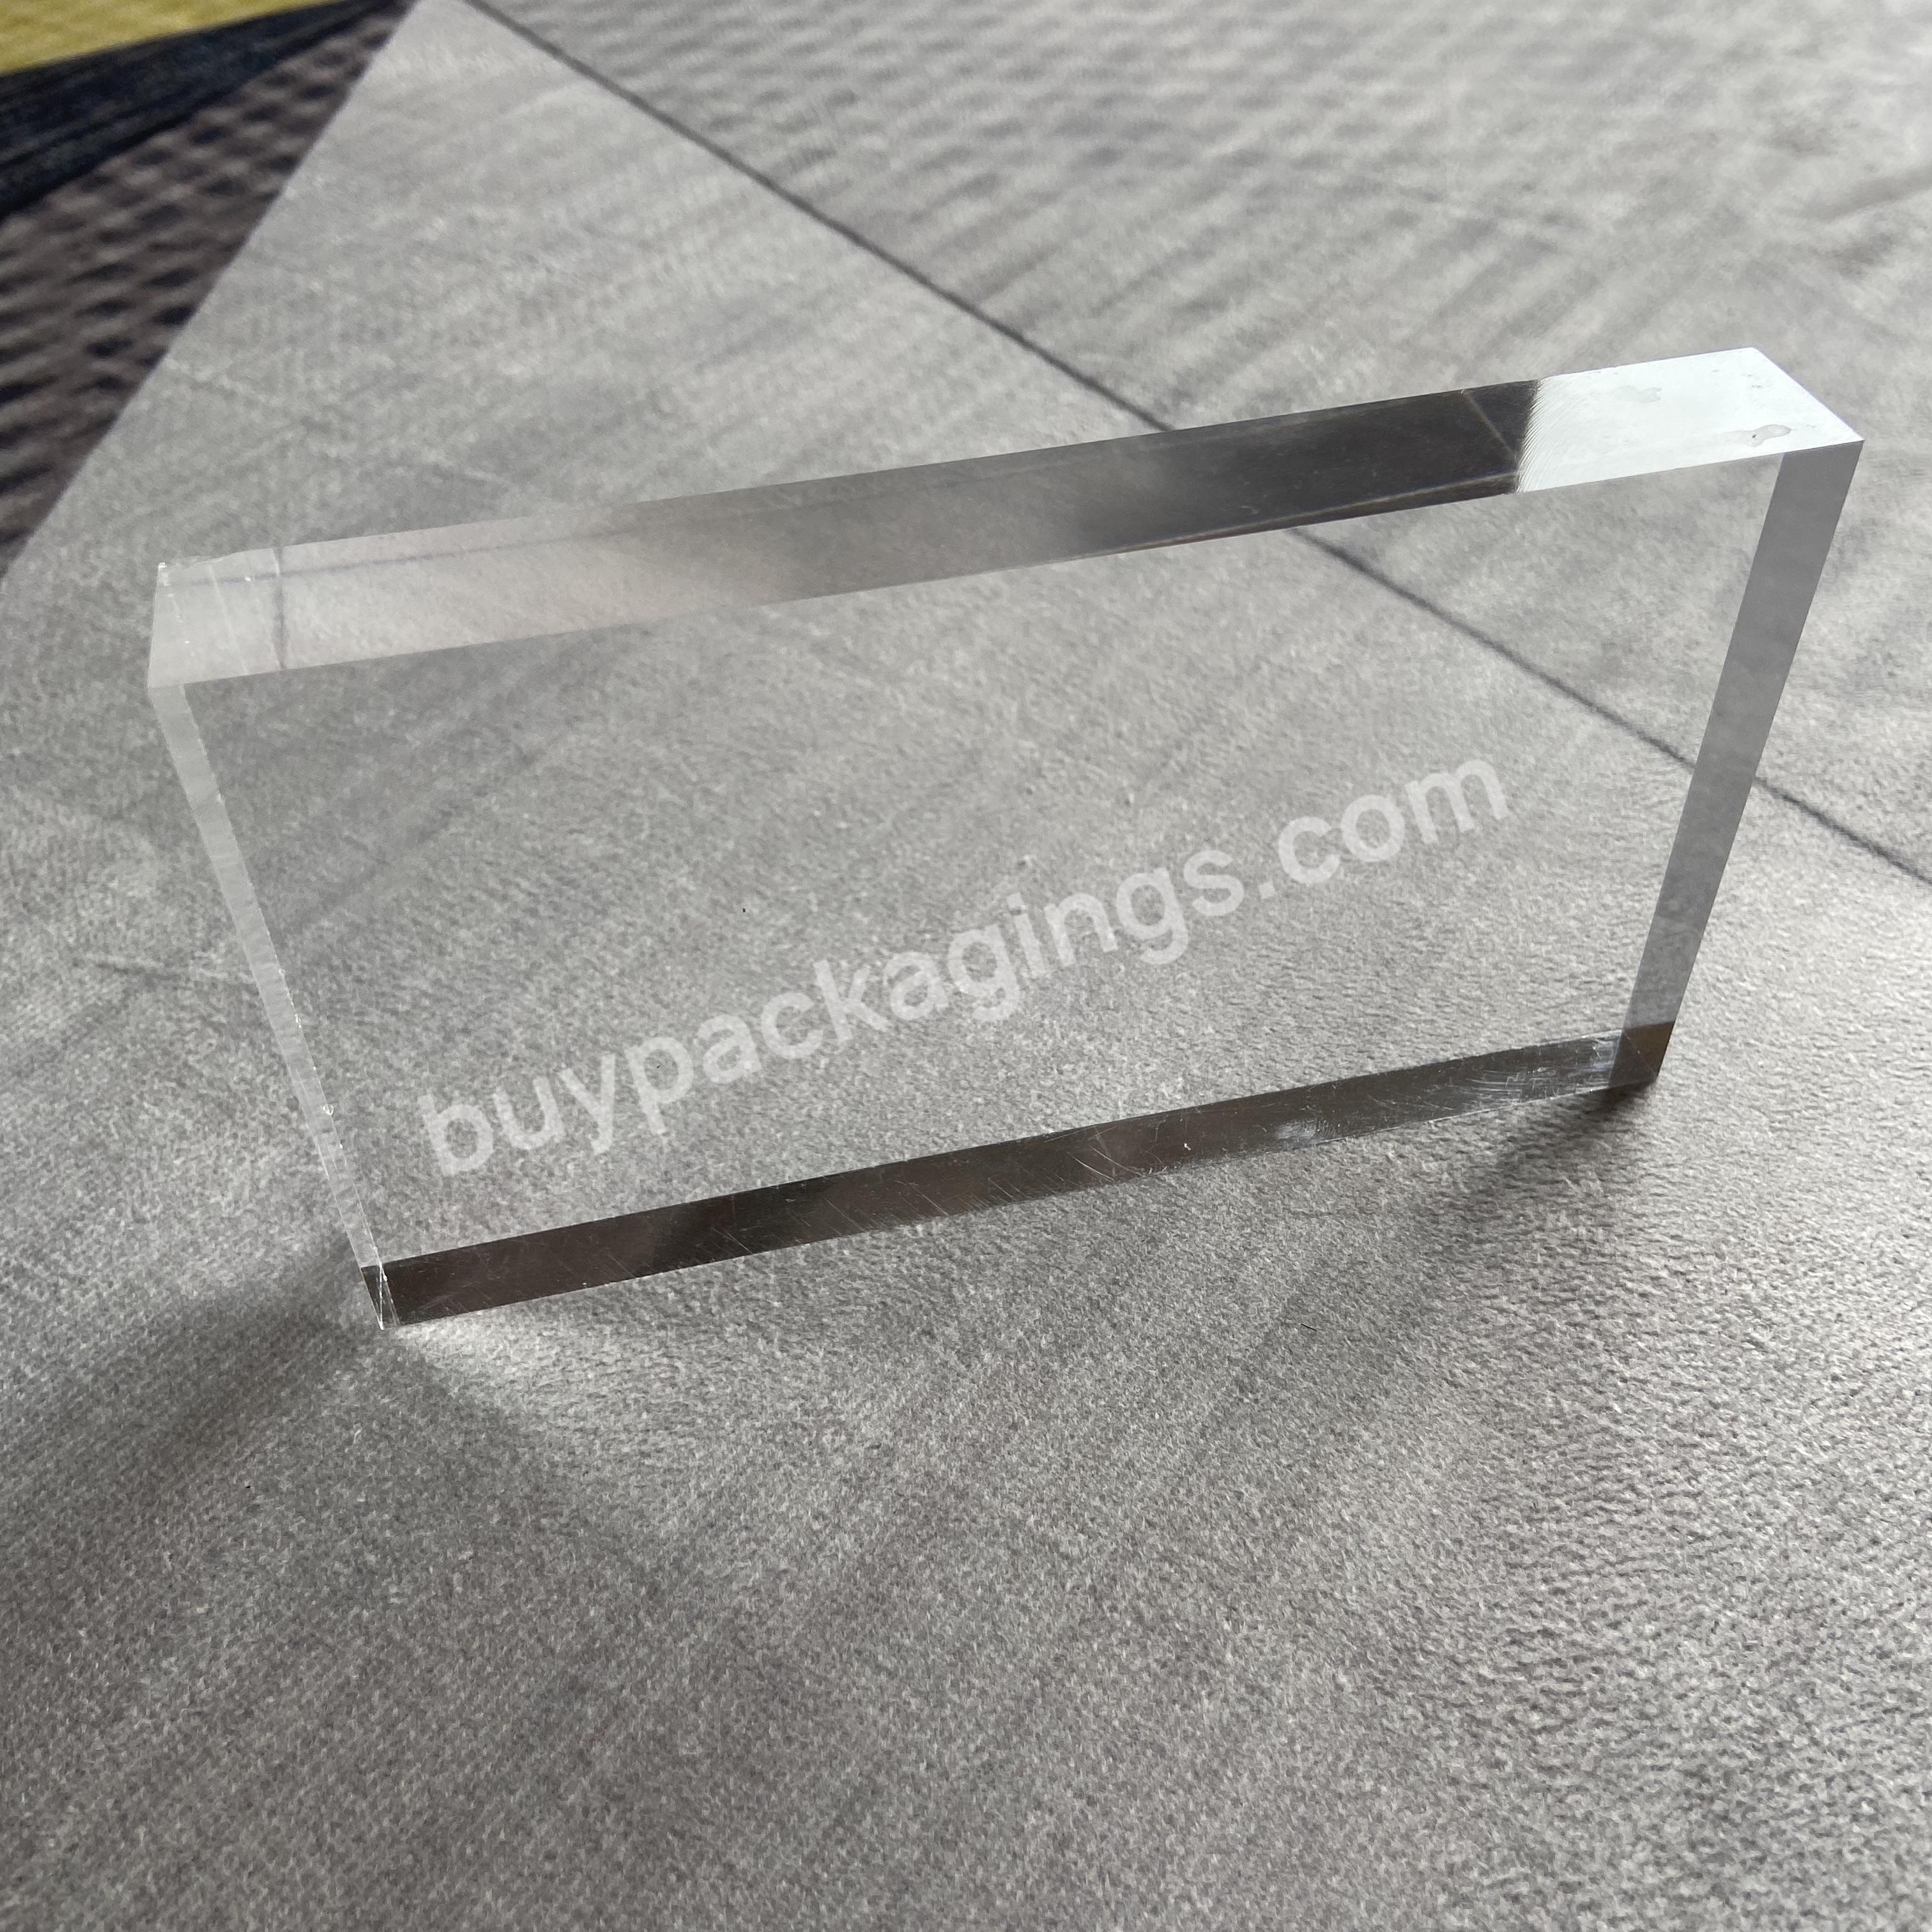 Customize A3 A4 A5 Cutting Size Acrylic Plastic Clear Transparent Perspex Sheet For Laser Cutting - Buy A3 Size Acrylic Sheet Board Cast 6mm Off Colour Color Cut To Szie,Customized Size Plastic Board A3 A4 Polished Perspex Pmma Lucite Plate Cast Acry